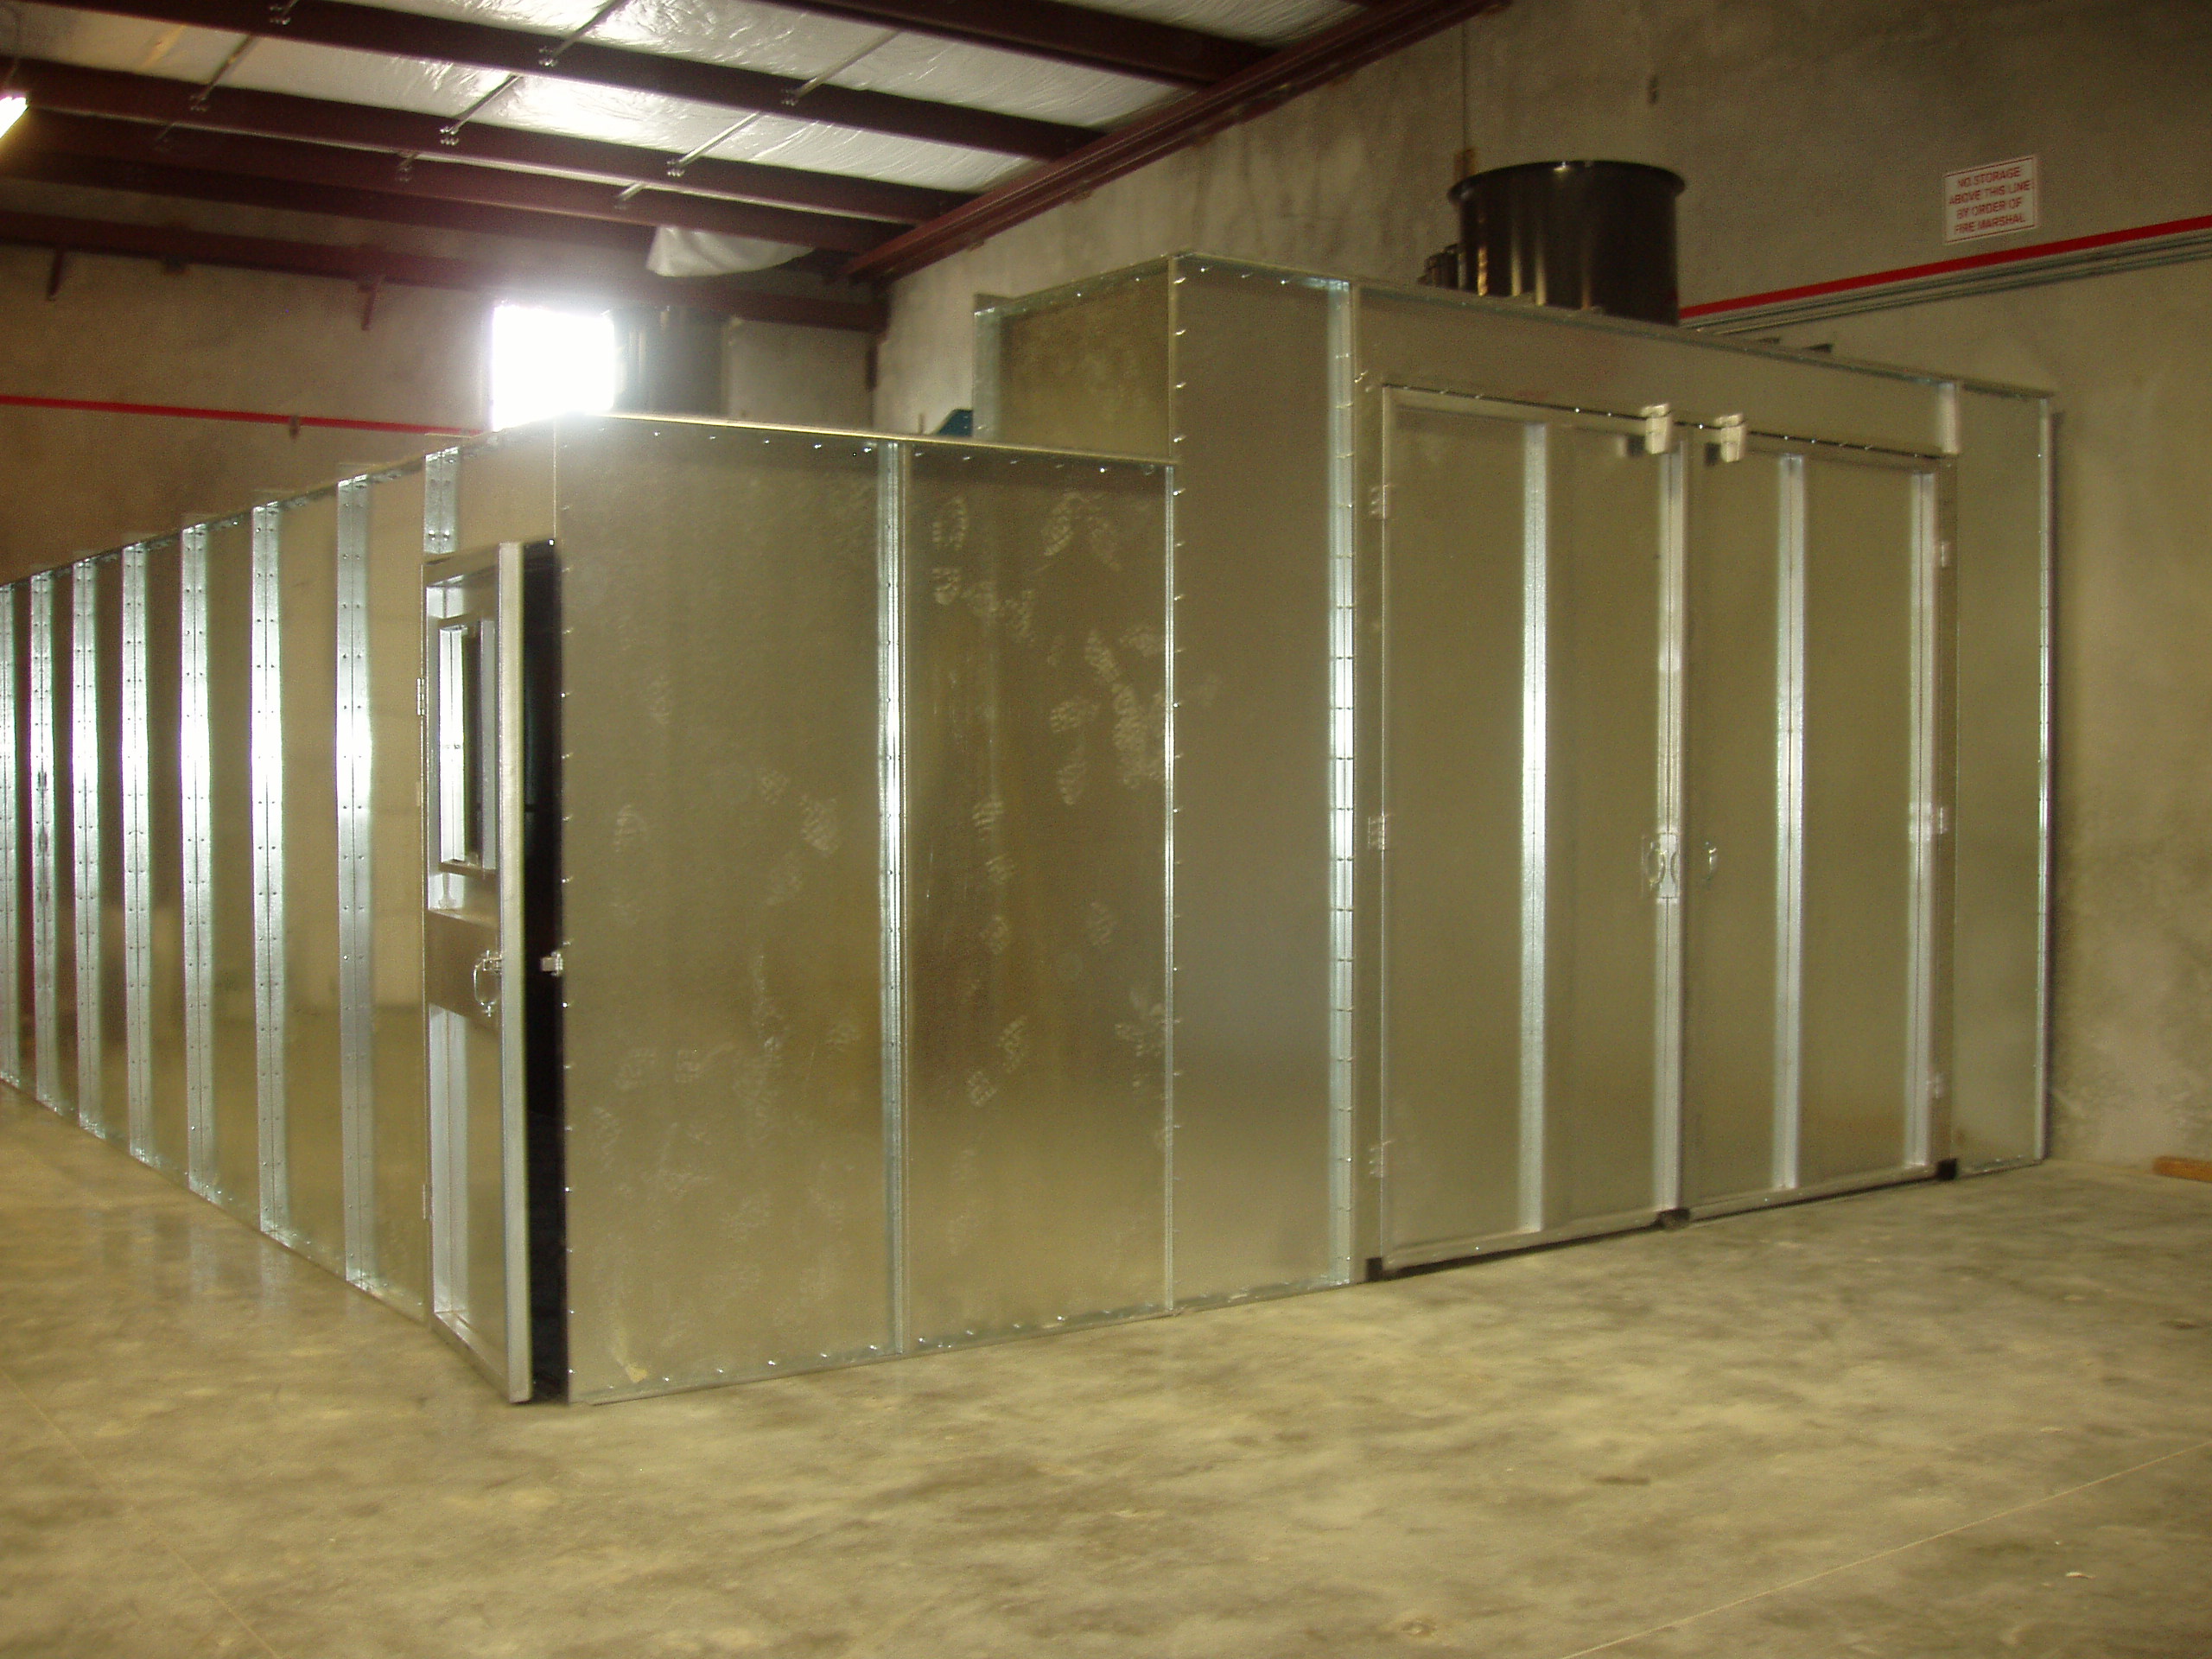 Auto & Industrial Paint Booths